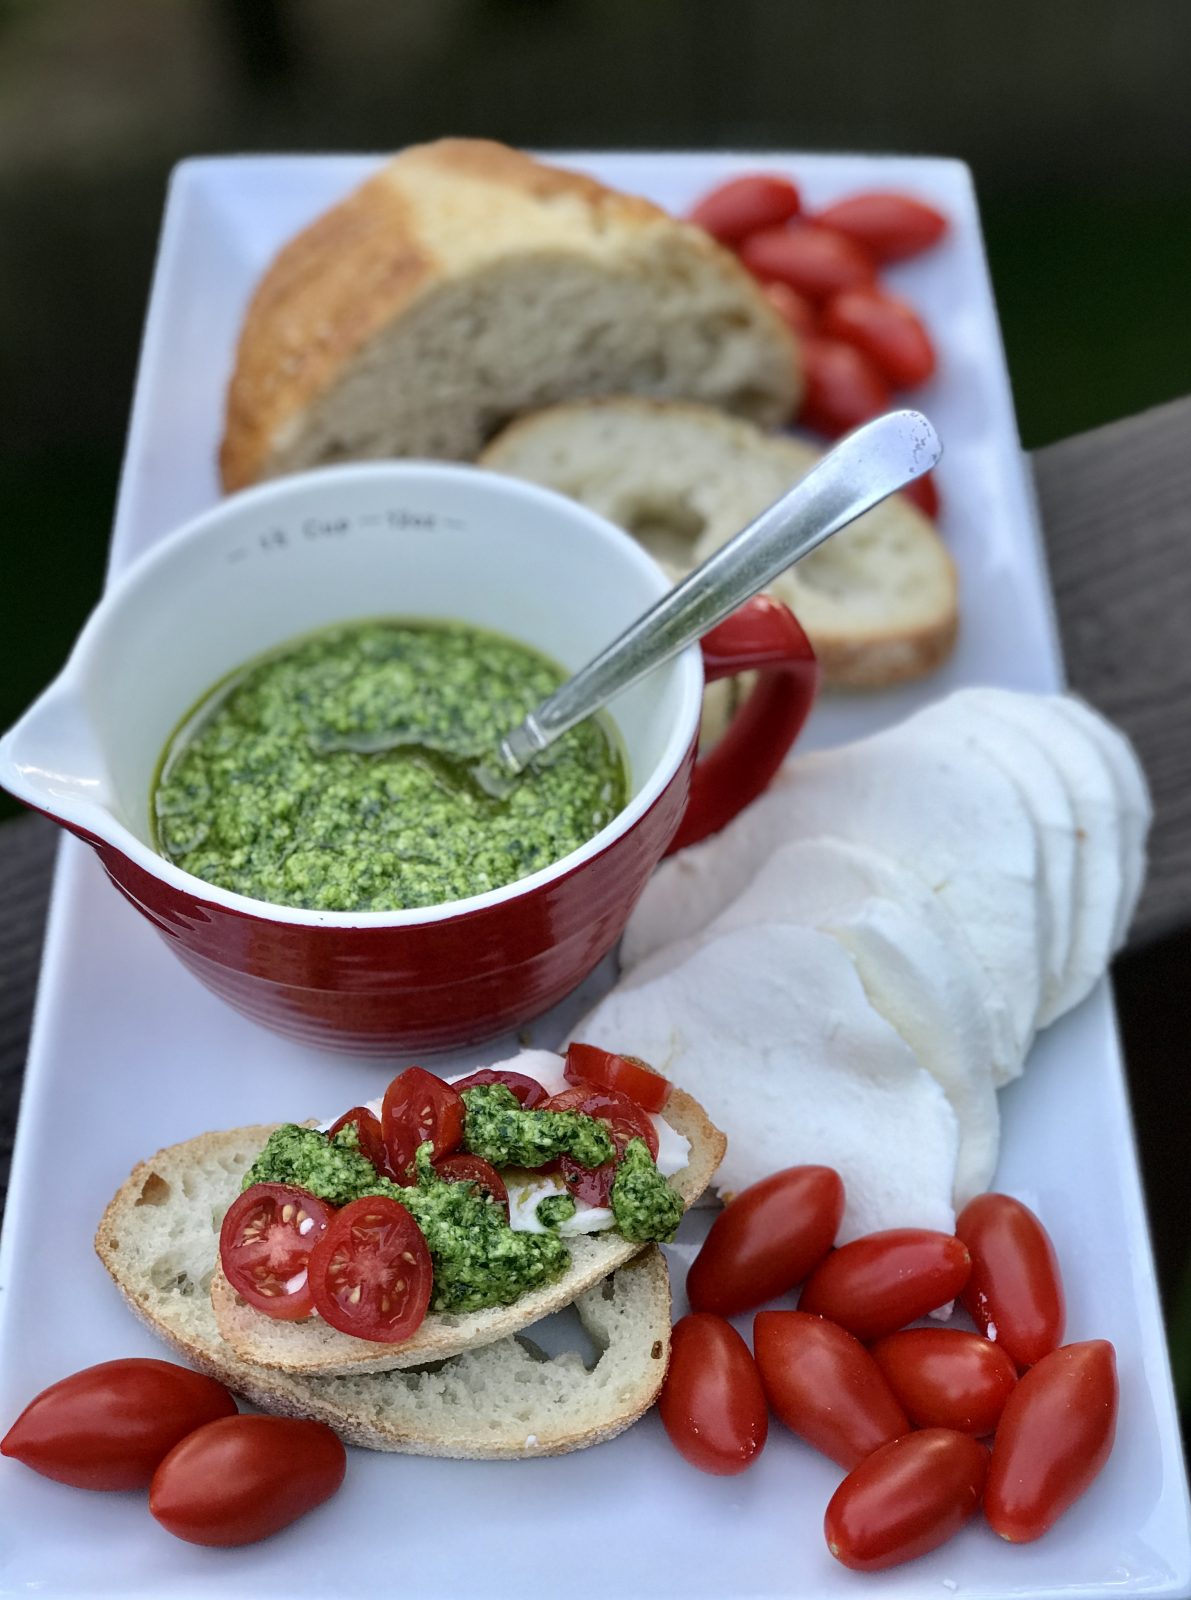 White rectangular tray with bread, spinach basil pesto in a red cup, mozzarella and grape tomatoes